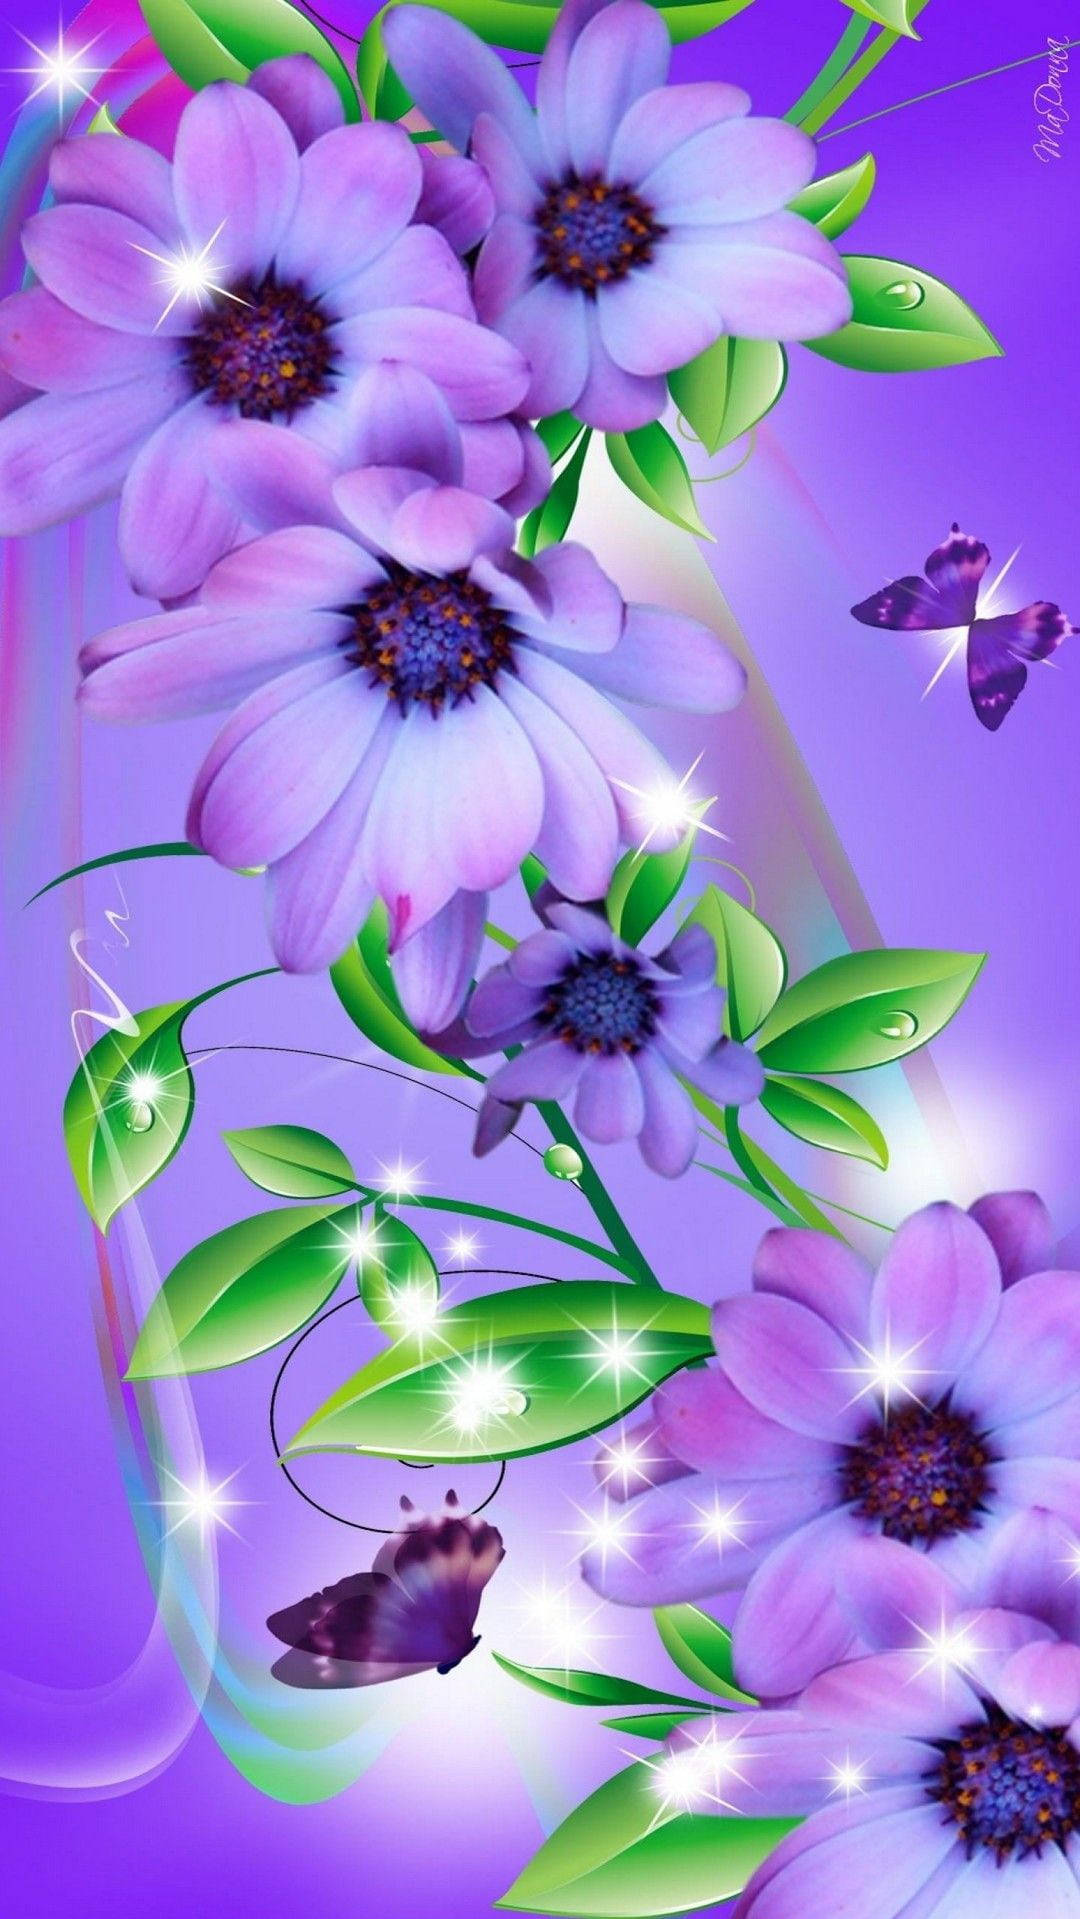 Sparkly Purple Daisies Flower Mobile Wallpaper